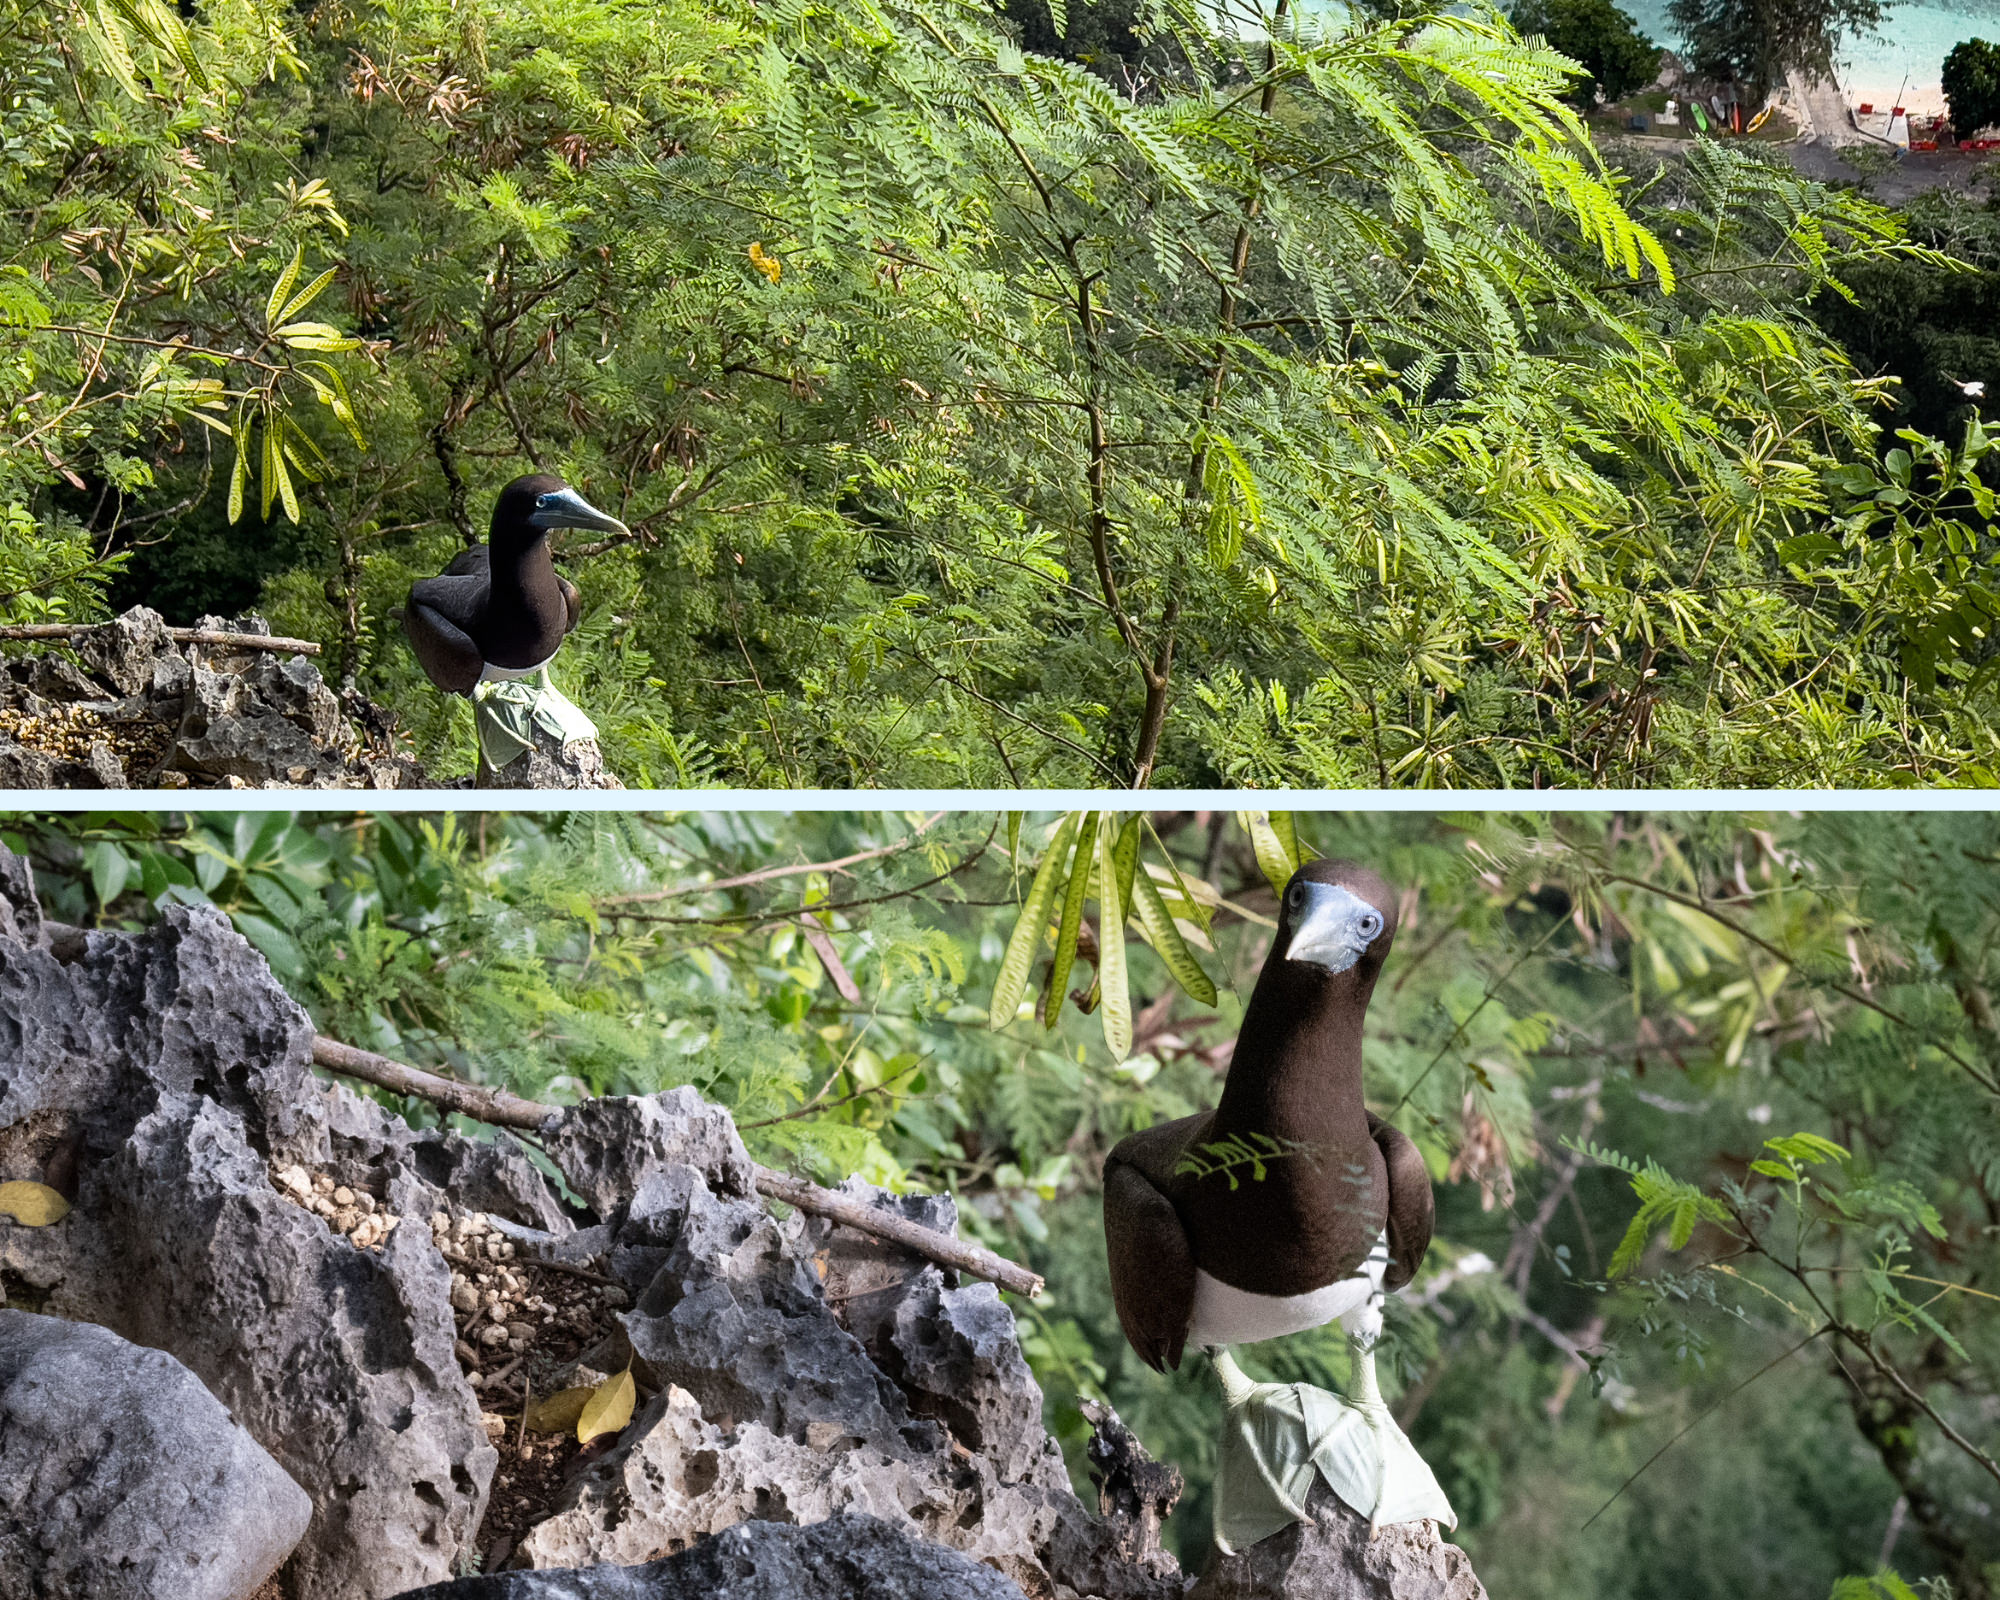 A photocollage of a curious brown booby bird perched on the side of a cliff overlooking Flying Fish Cove